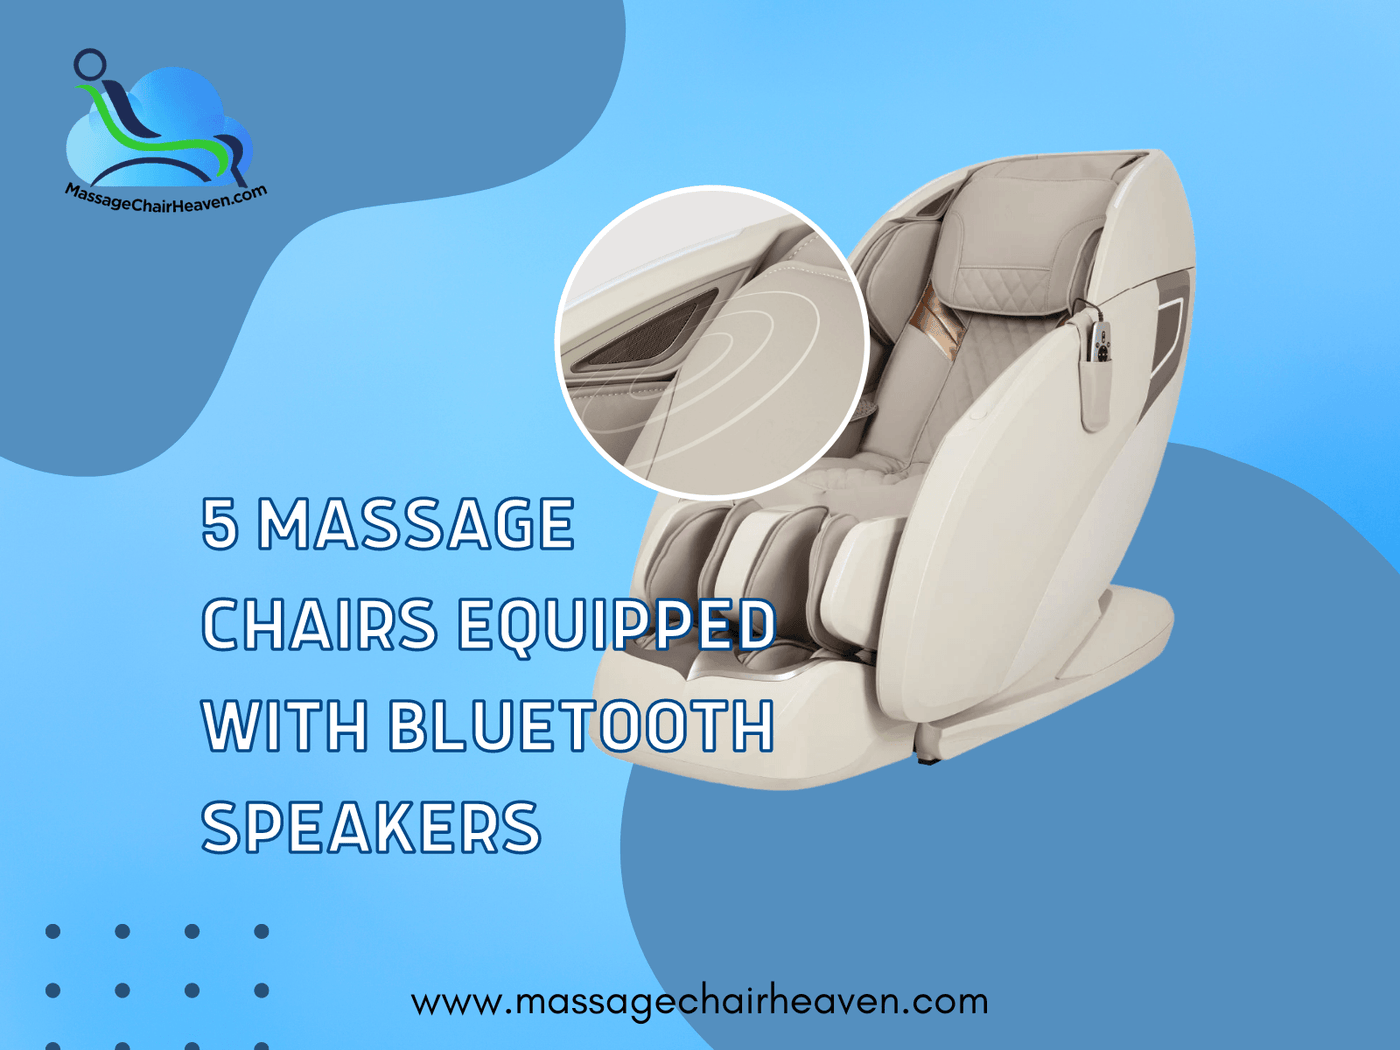 5 Massage Chairs Equipped with Bluetooth Speakers